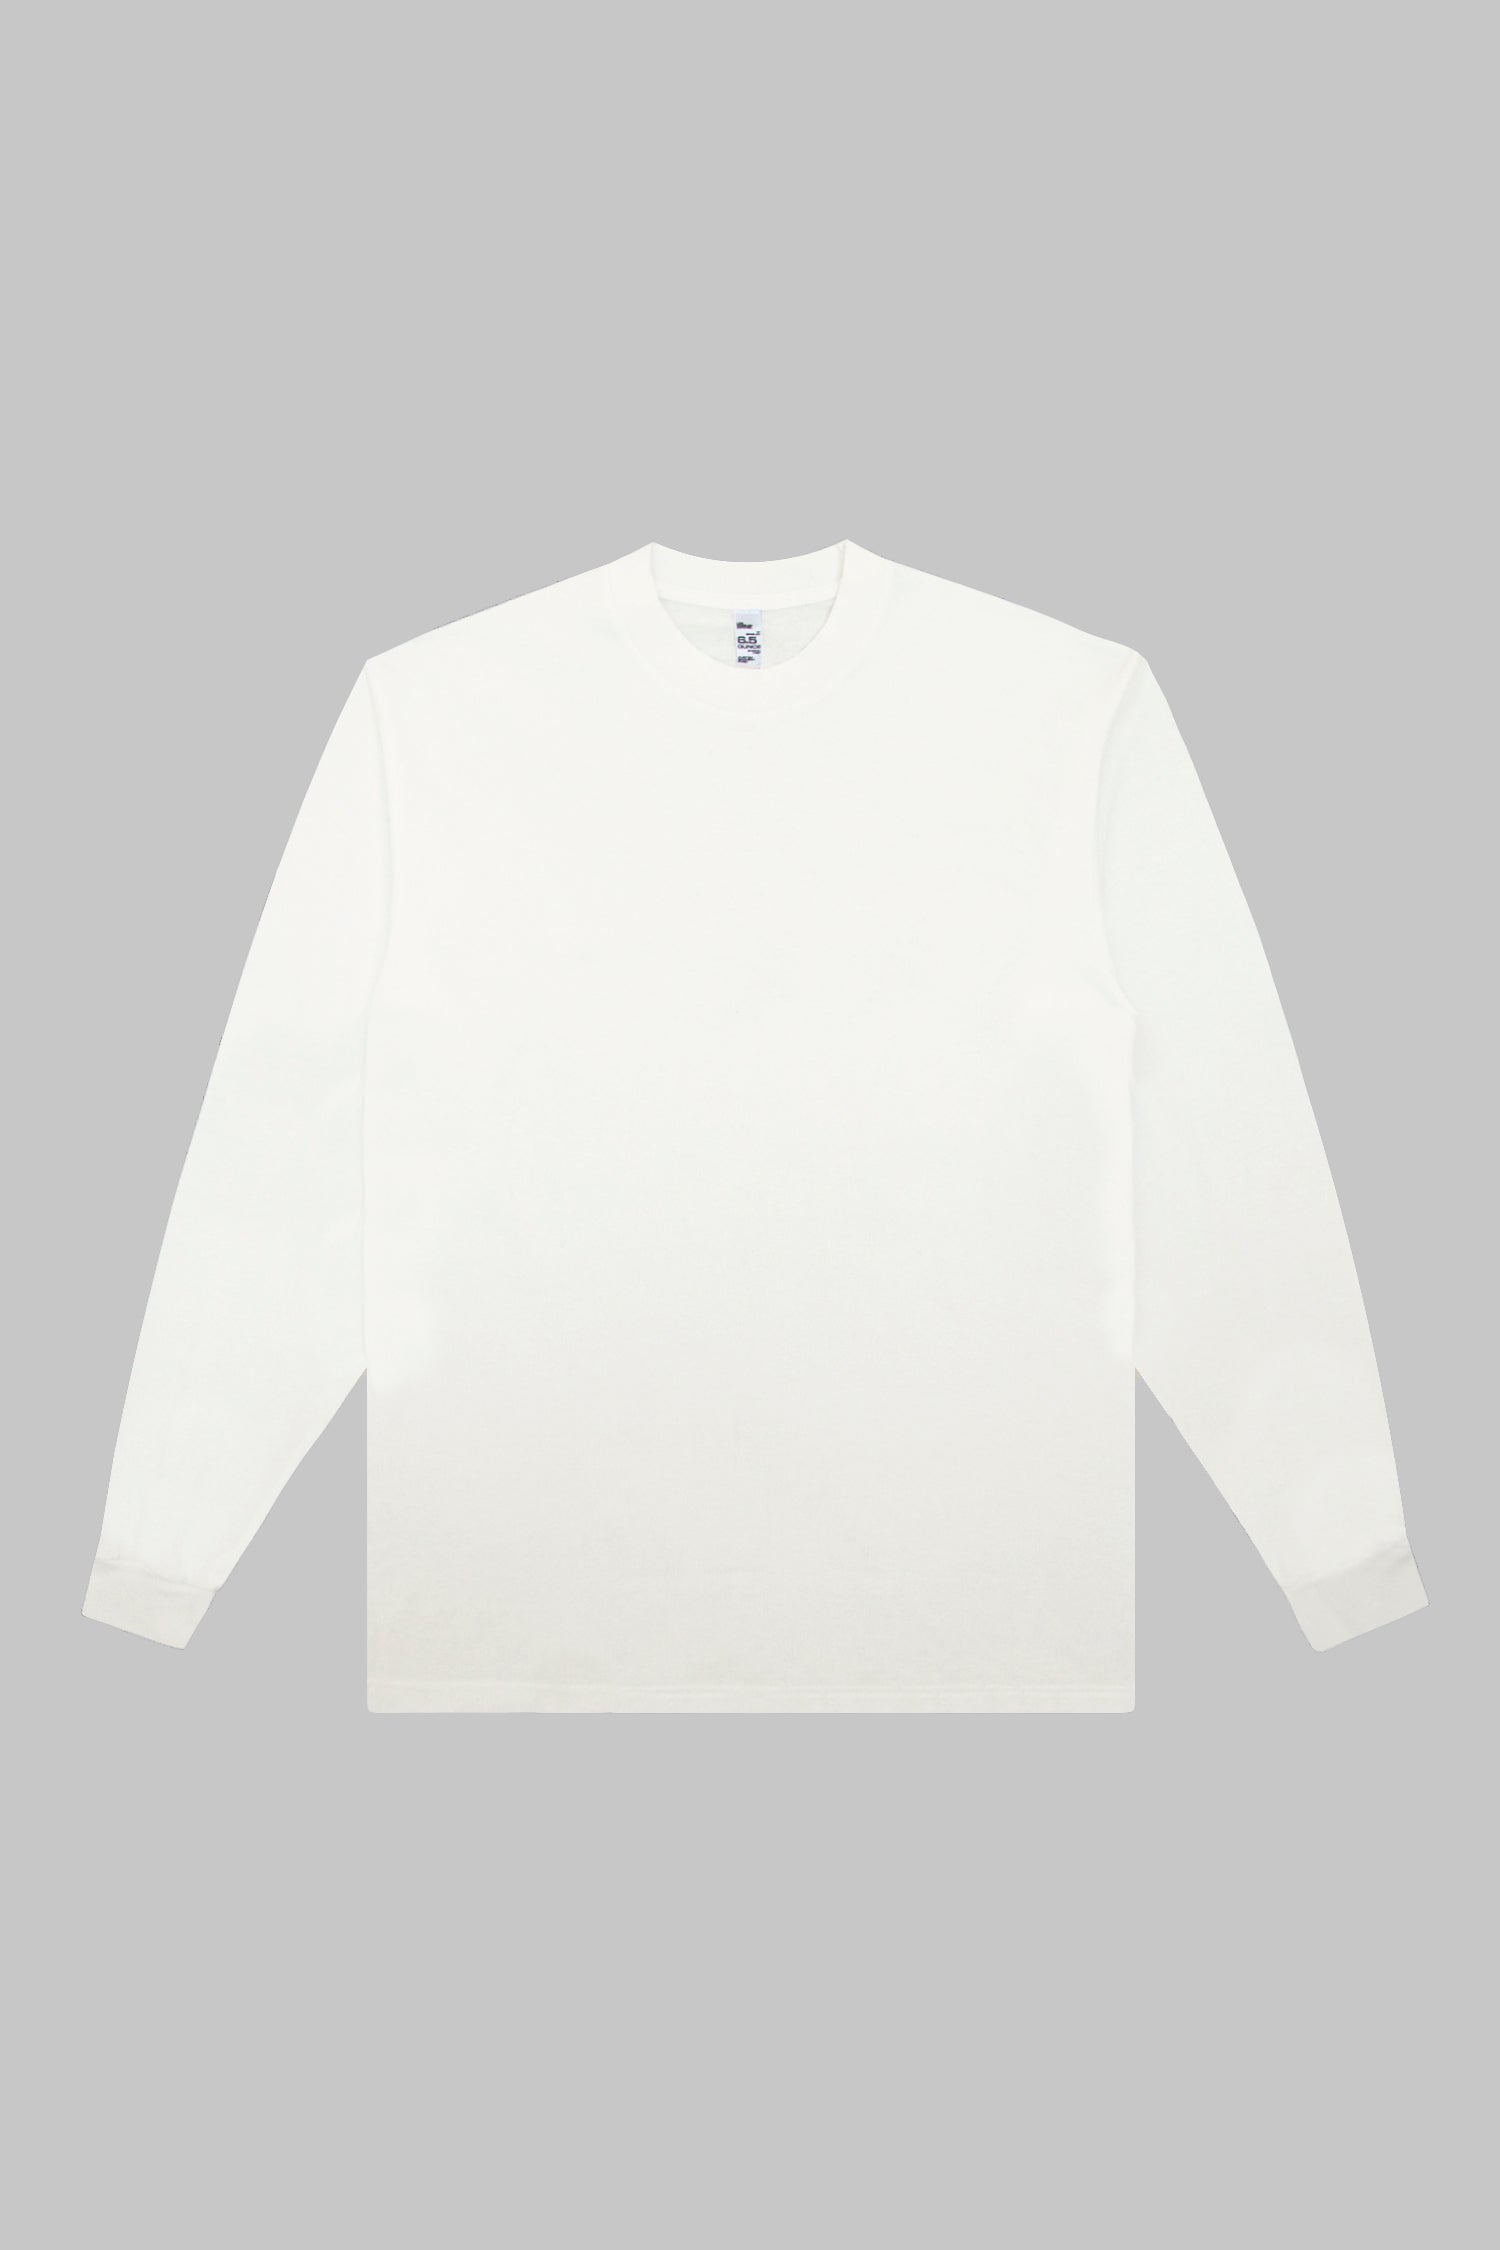 Los Angeles Apparel | Shirt for Men in Off White, Size 2XL